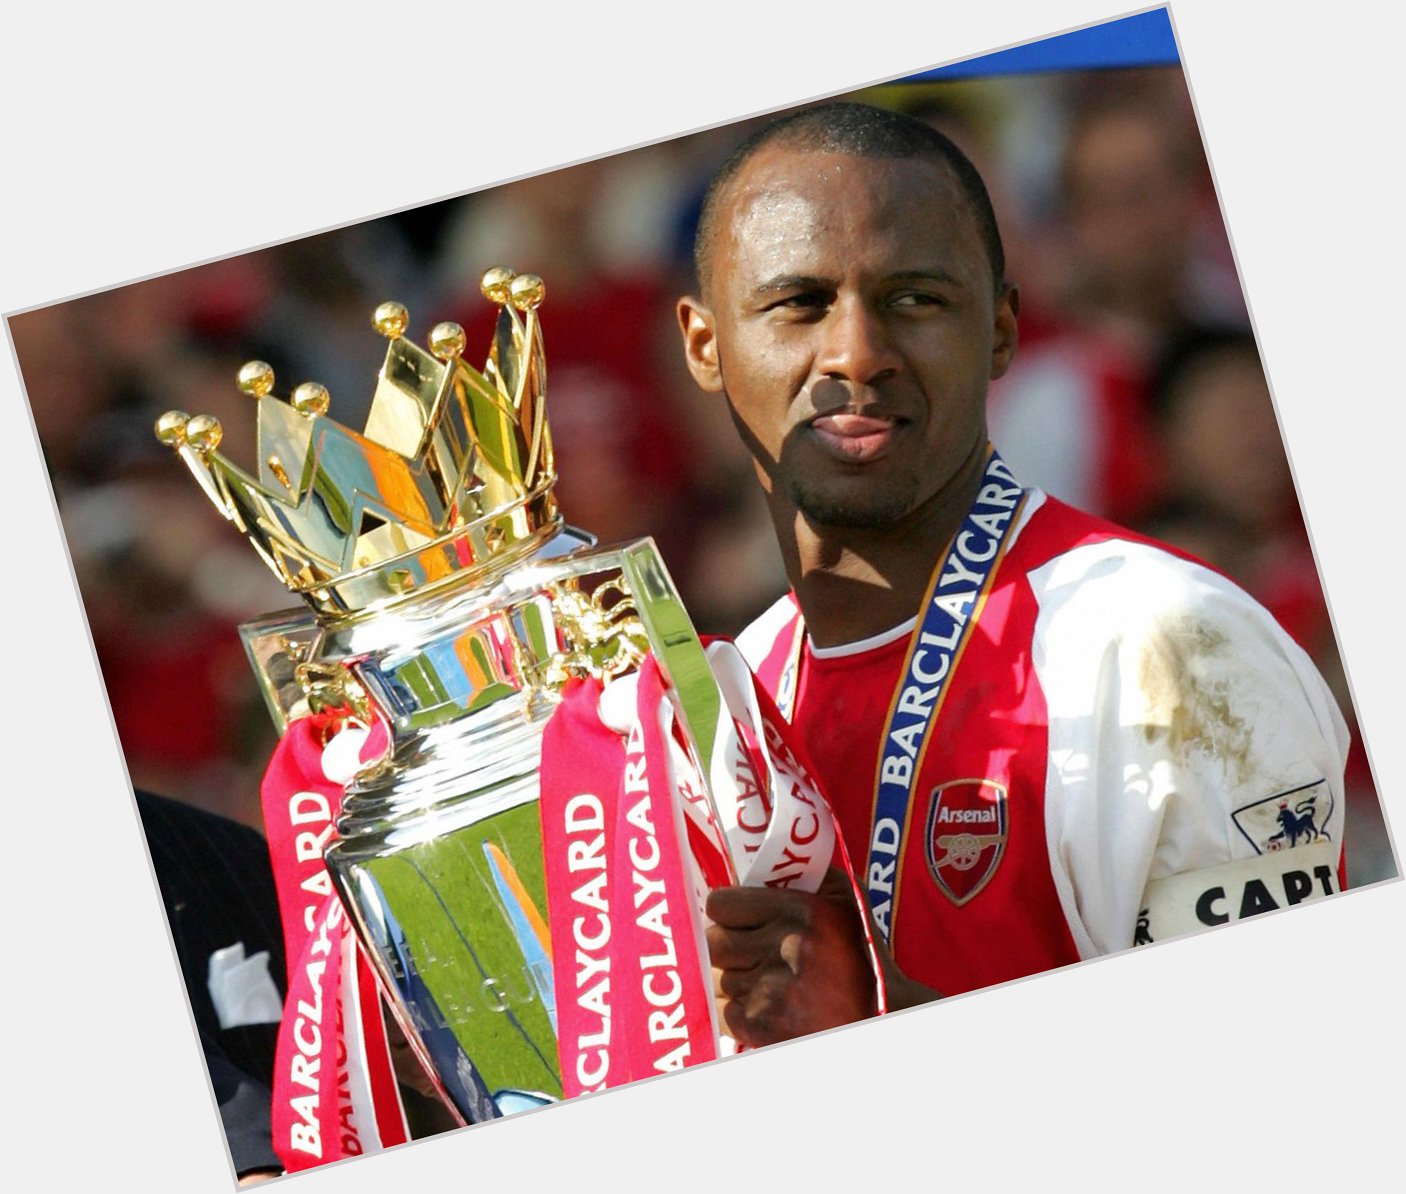 Happy birthday to Arsenal legend and Invincibles captain Patrick Vieira, who turns 41 today! 